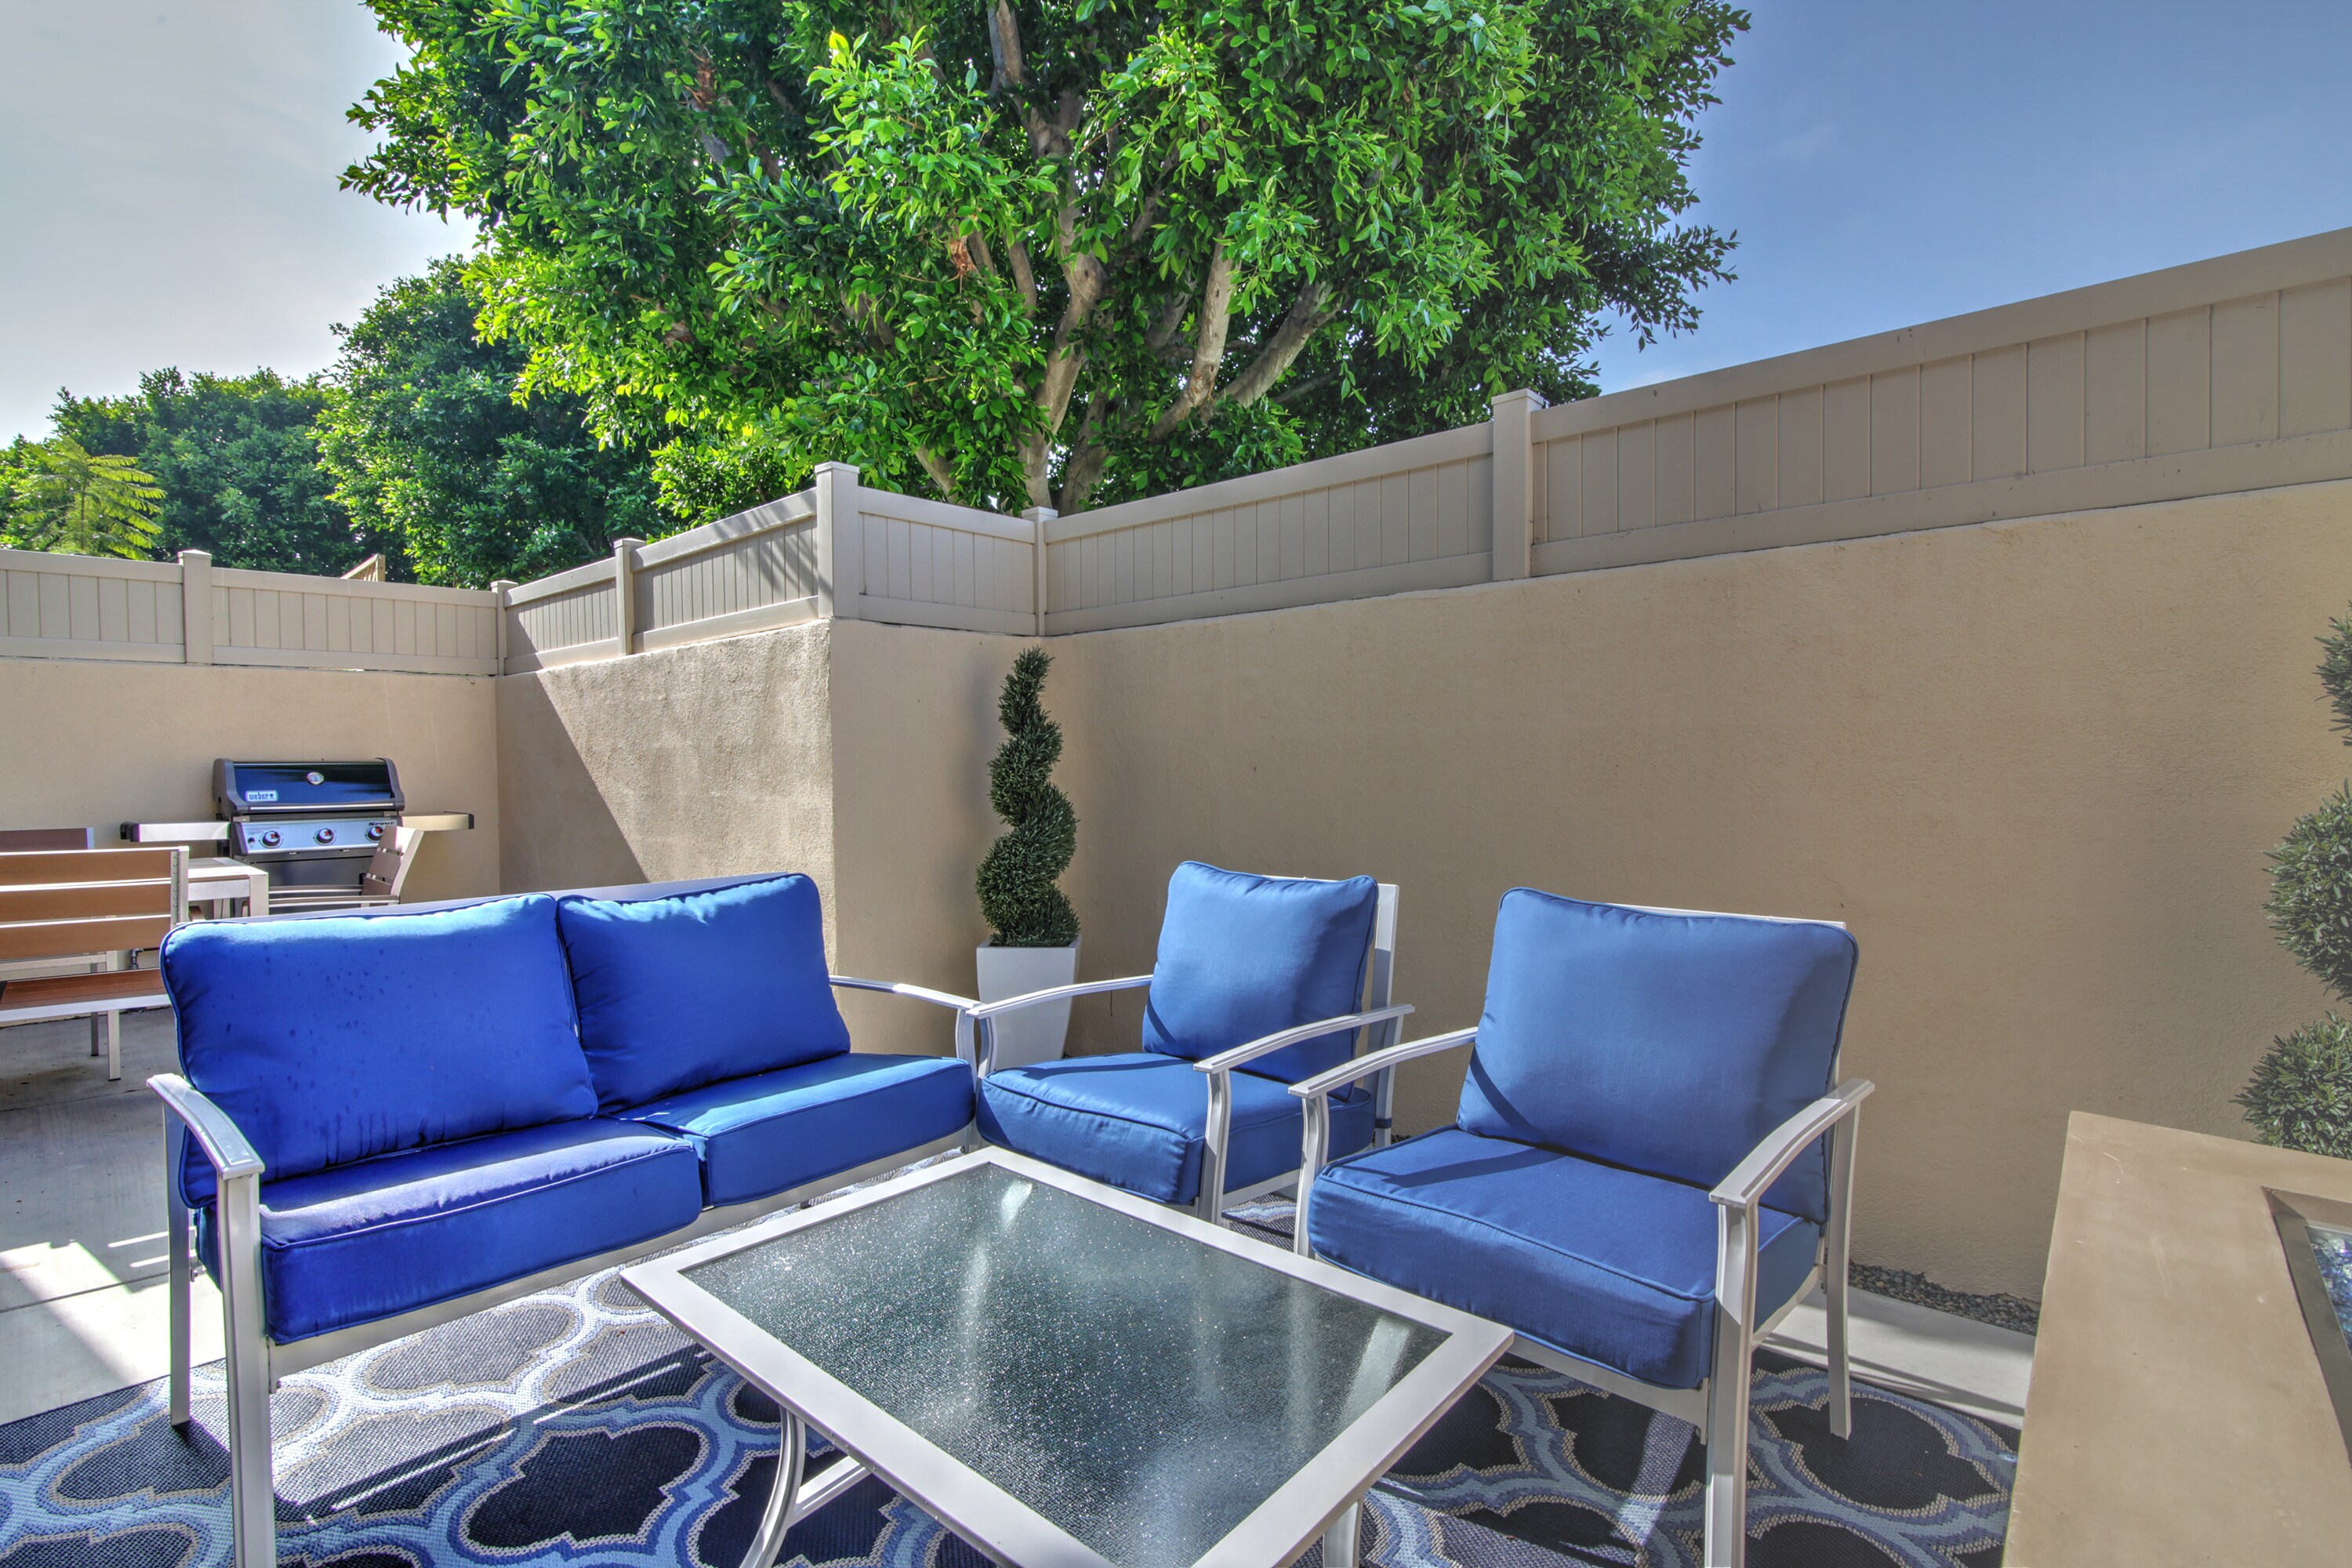 Enjoy the magical golden hour on the private patio.